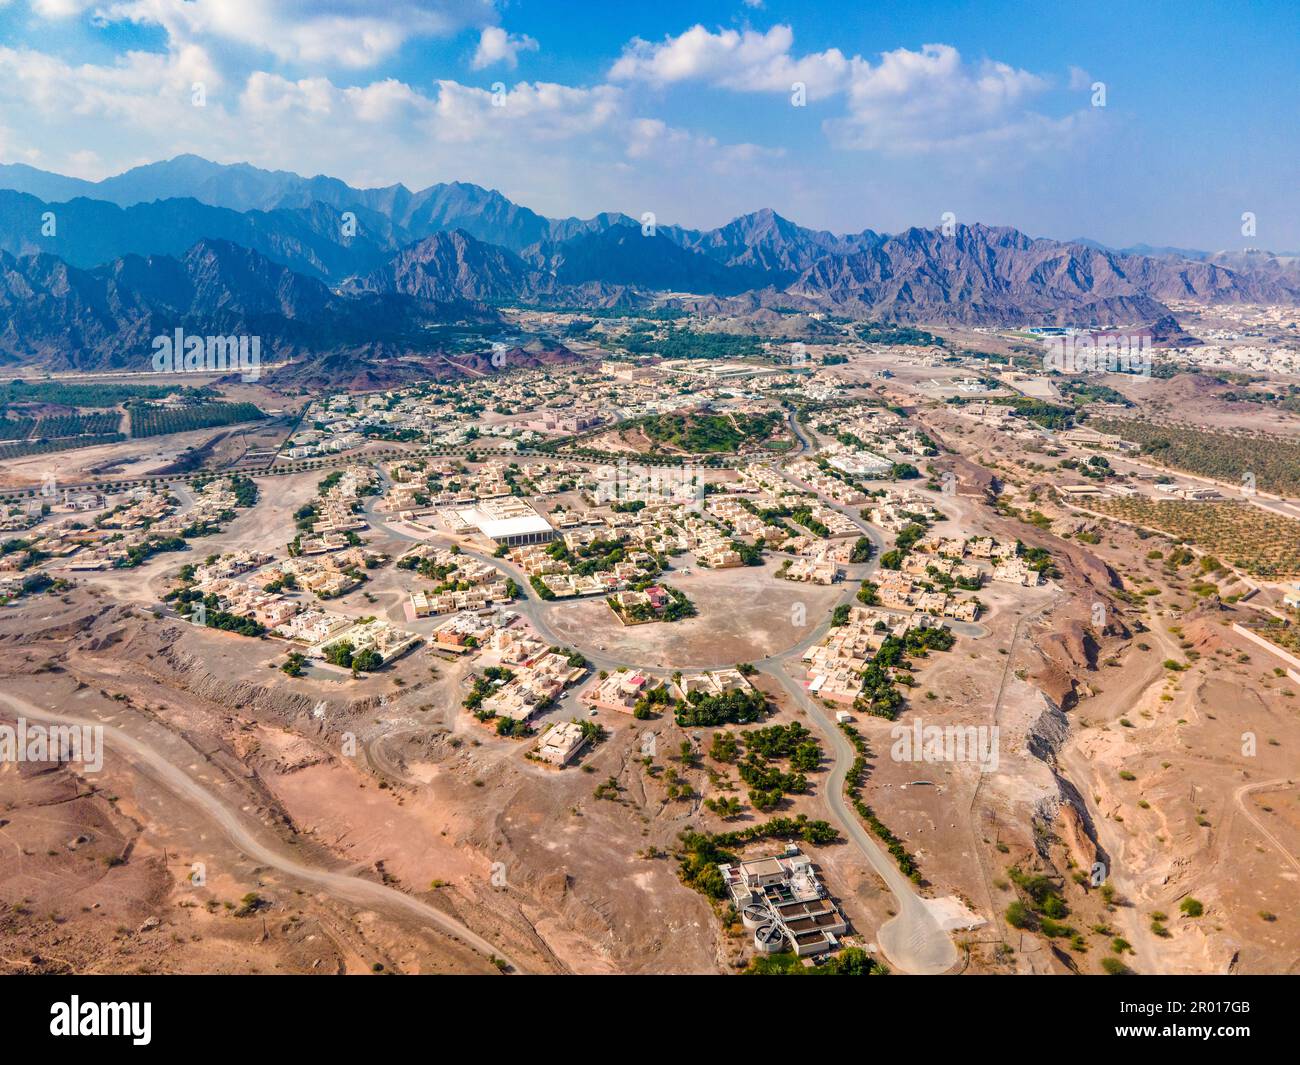 Hatta town aerial cityscape surrounded by Hajar mountains in Hatta enclave of Dubai in the United Arab Emirates aerial view Stock Photo